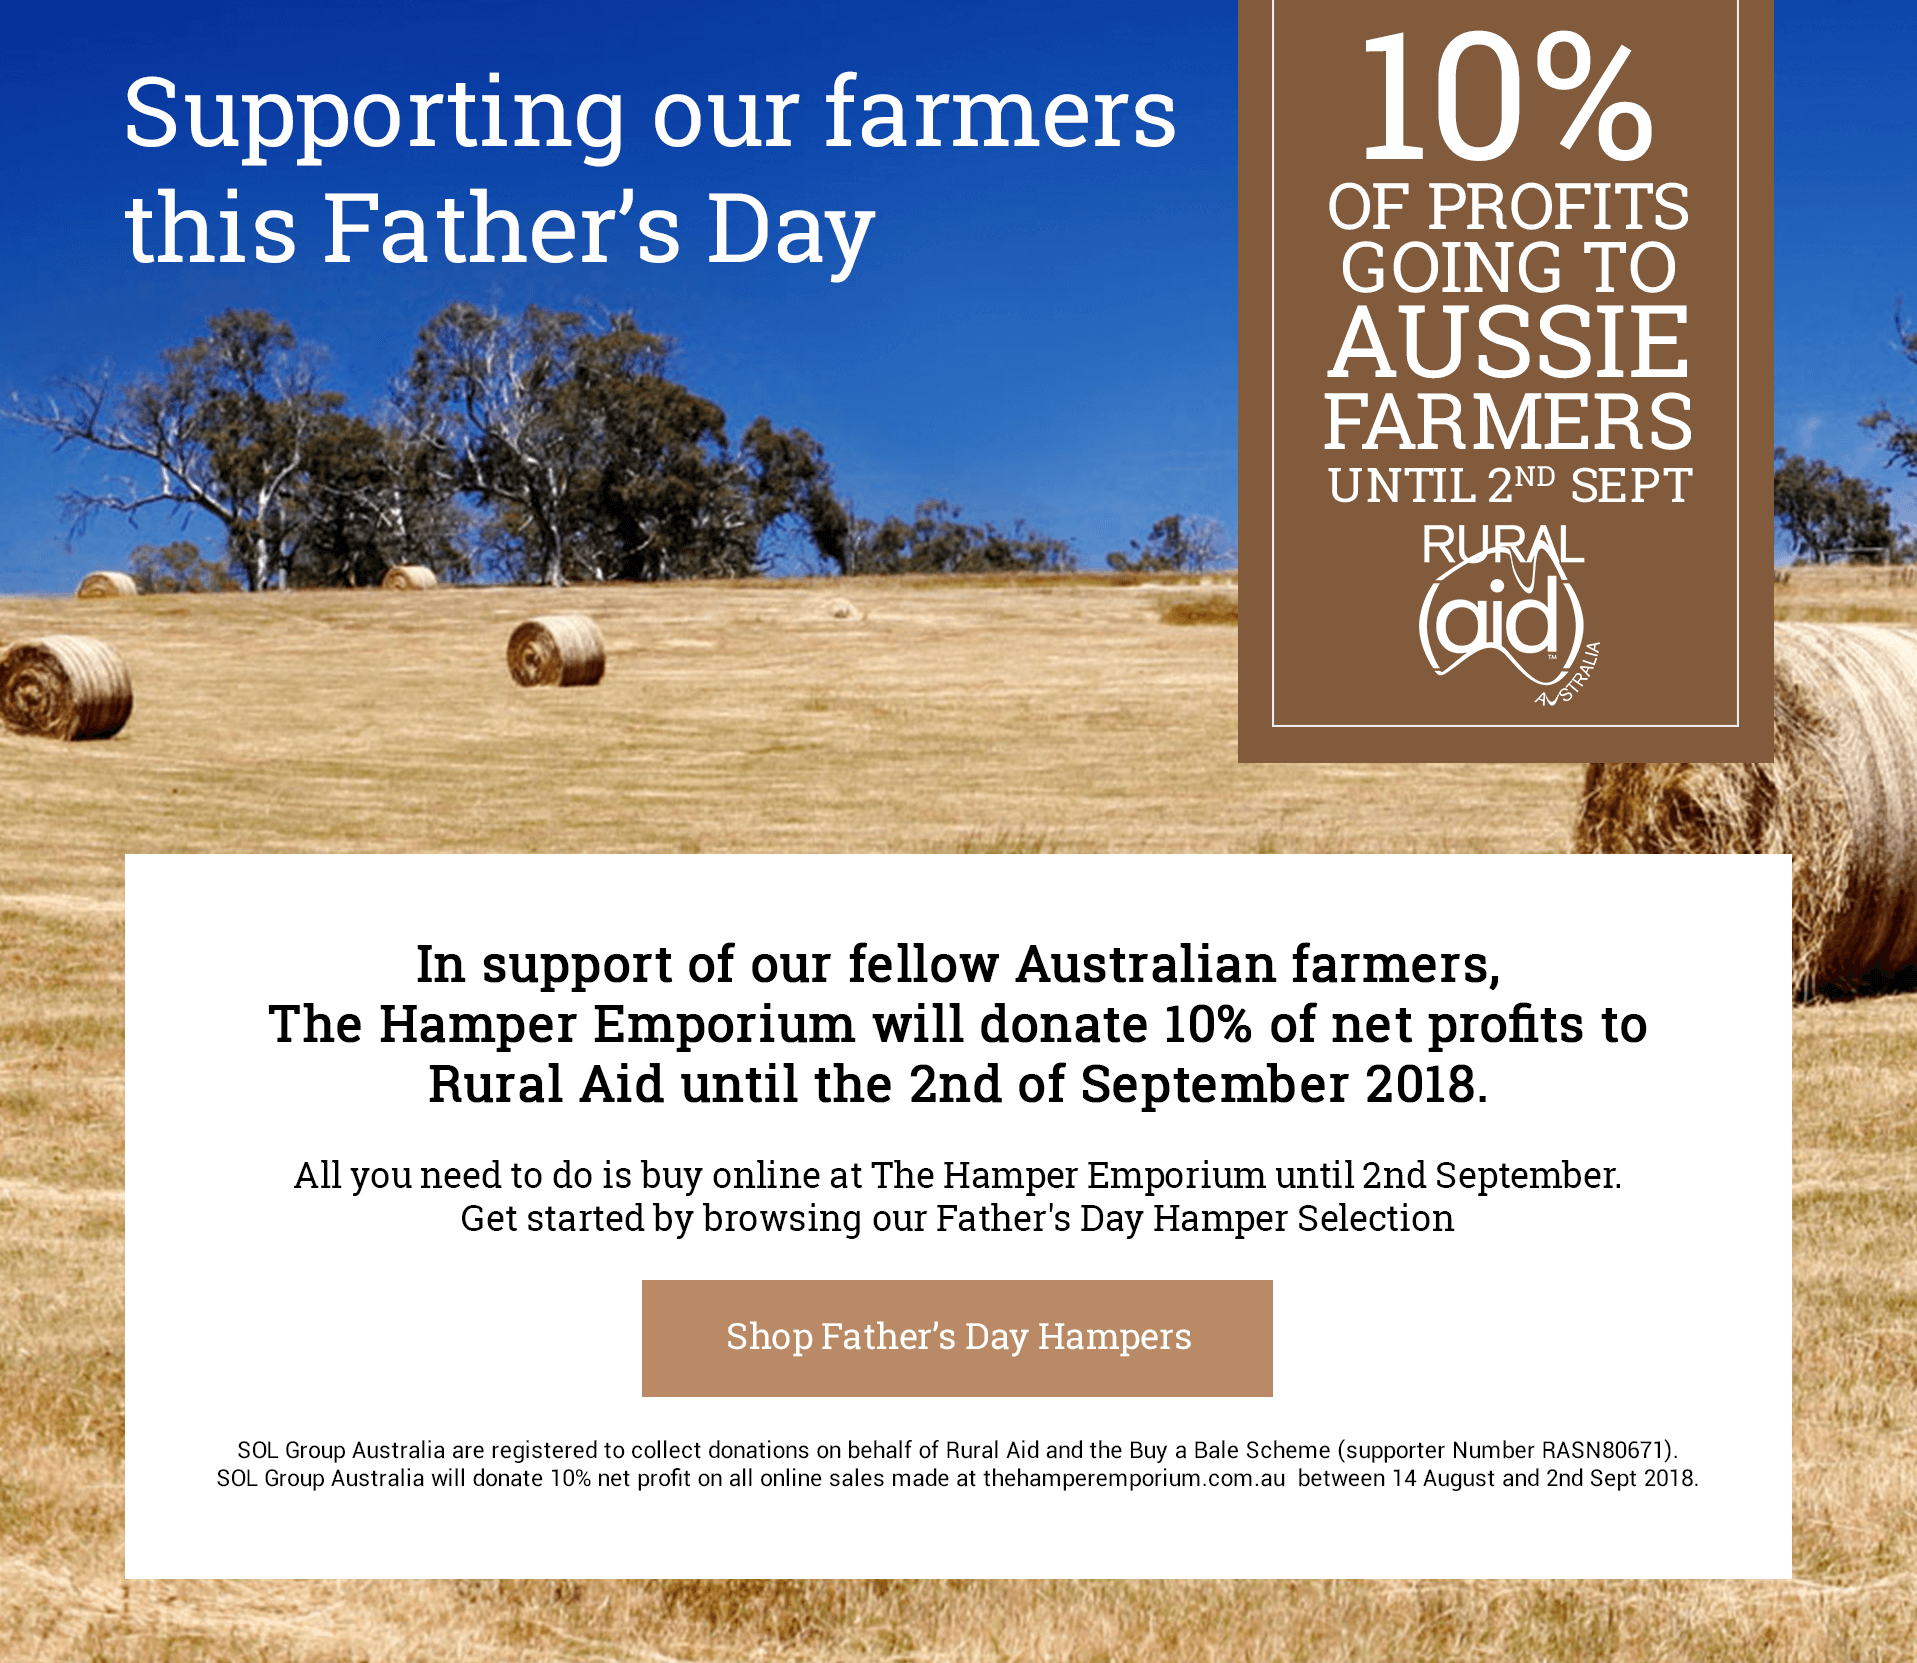 Supporting our Farmers this Father's Day - 10 Percent of profits going to Aussie Farmers until 2nd September. In support of our fellow Australian farmers, The Hamper Emporium will donate 10 percent of net profits to Rural Aid until the 2nd of September 2018. All you need to do is buy online at The Hamper Emporium until 2nd September. Get started by browsing our Father's Day Hamper Selection. Click here to Shop Father's Day Hampers. SOL Group Australia are registered to collect donations on behalf of Rural Aid and the Buy a Bale Scheme (supporter Number RASN80671). SOL Group Australia will donate 10% net profit on all online sales made at thehamperemporium.com.au  between 14 August and 2nd Sept 2018.